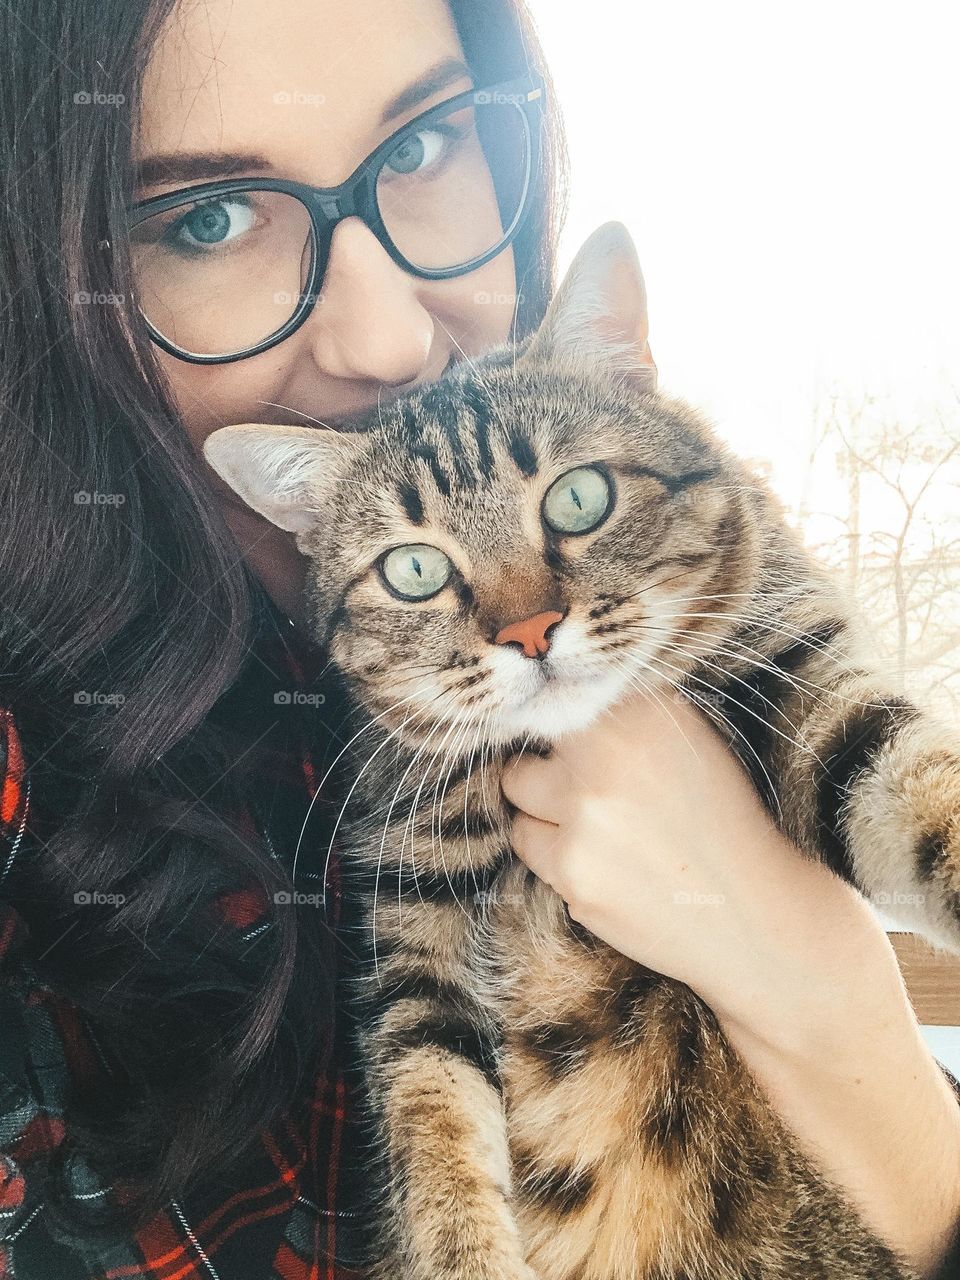 Girl with cat. Selfie photo 